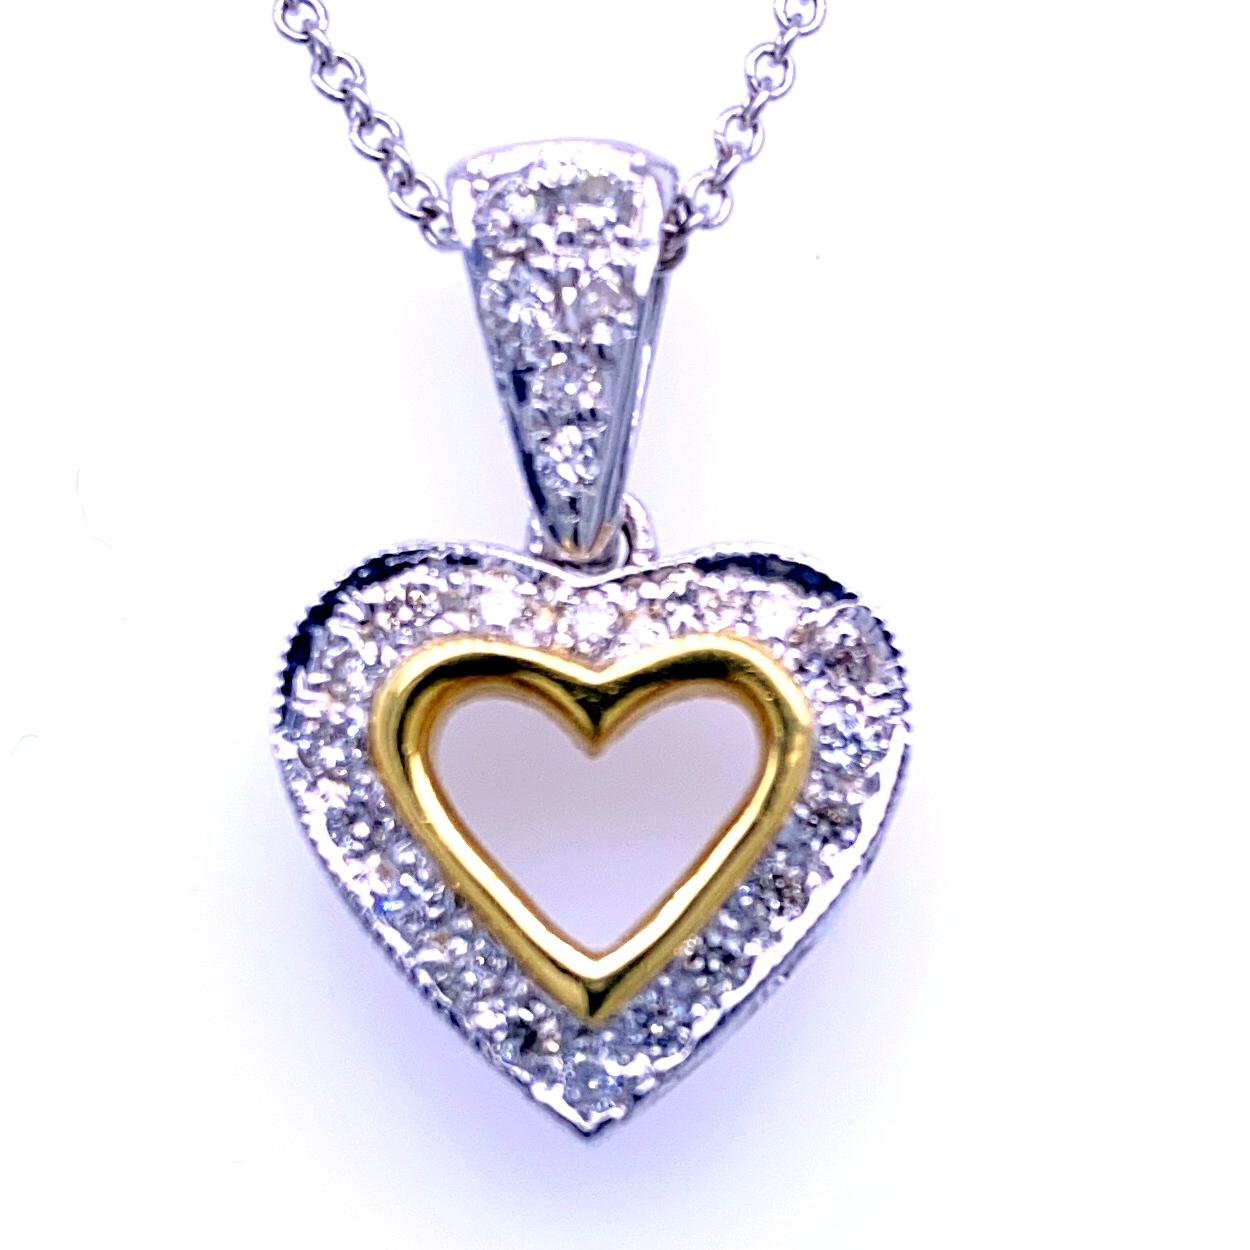 18K Gold Heart shaped Pendant with Pave Set Halo and Bale with total weight of 0.42 Ct. 
Total Diamond Weight: 0.42 Ct
Total Necklace Weight: 4.50 gr
Pendant Size 14.3x14.3 mm (22 mm height)
Chain is not included